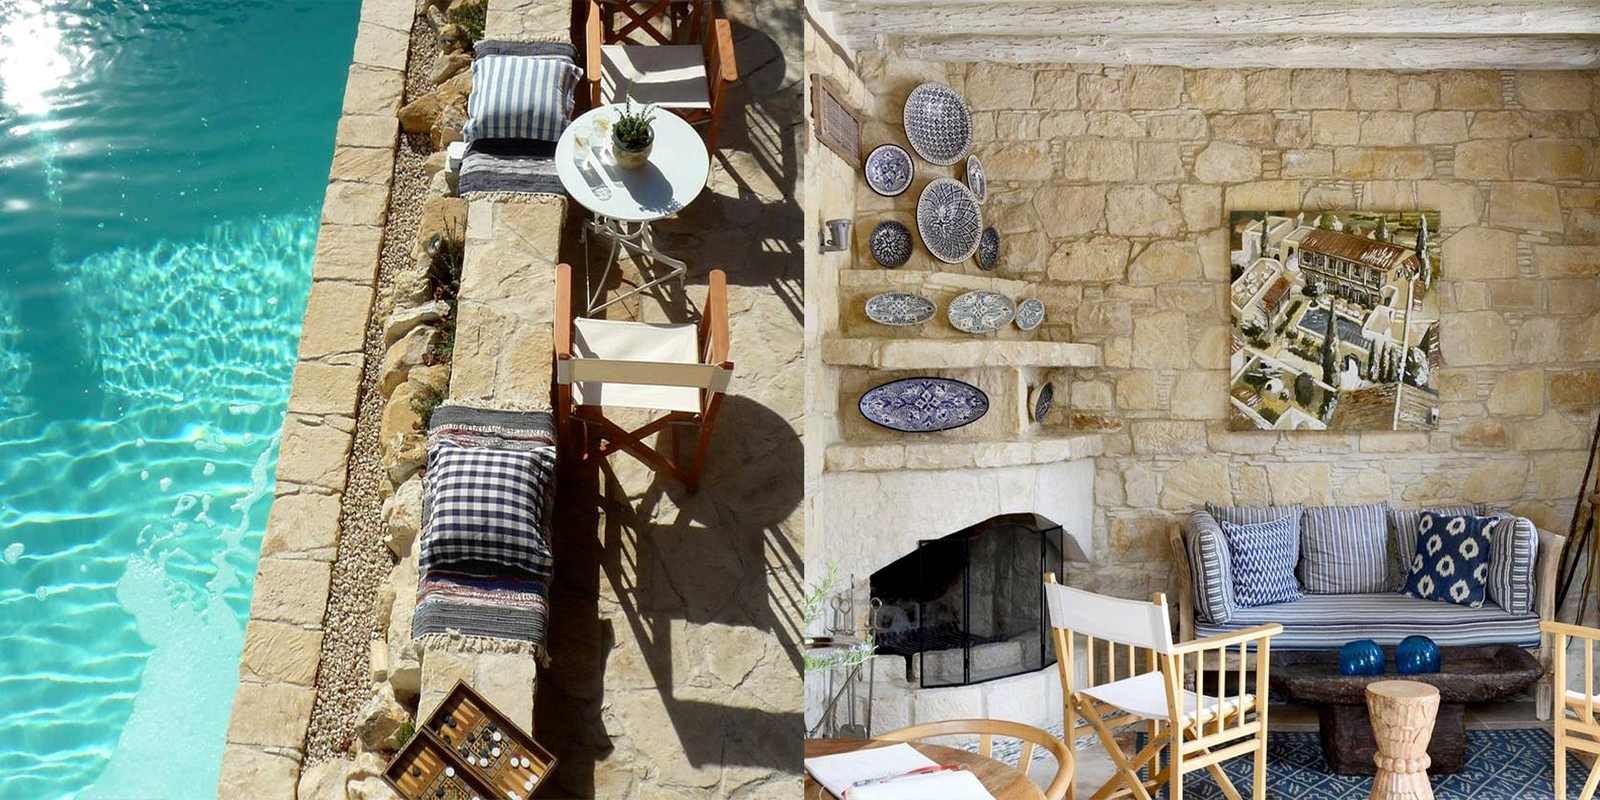 Beach <br />Villa Pantheon accommodation in pafos”></p>
<h3><b>Apokryfo Traditional Guesthouse</b></h3>
<p><b>Where to stay?</b></p>
<div>Located at the edge of the picturesque village of Lofou, in the foothills of Mount Olympus, <a class=